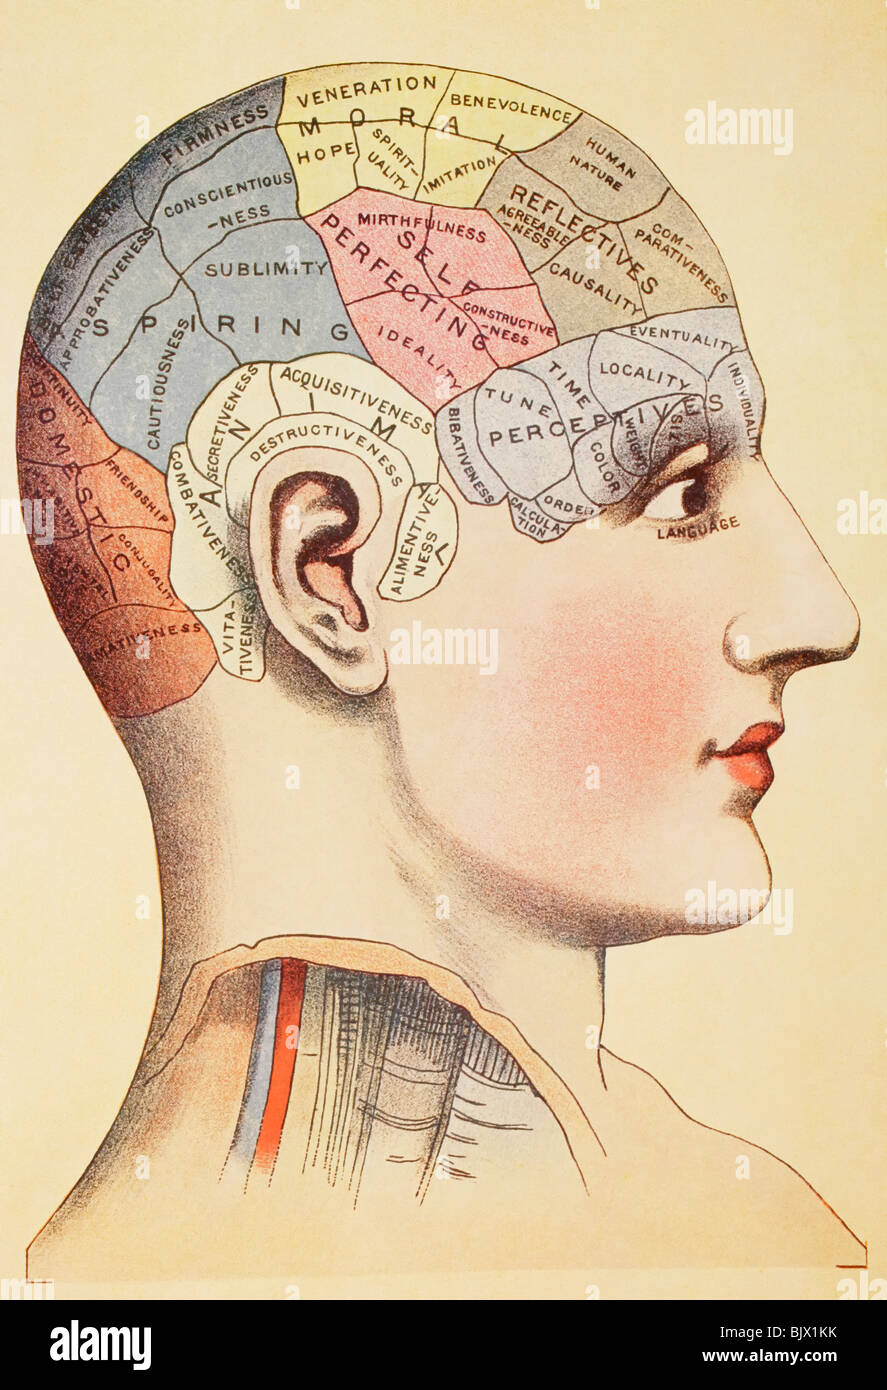 A phrenological map of the human brain. Stock Photo